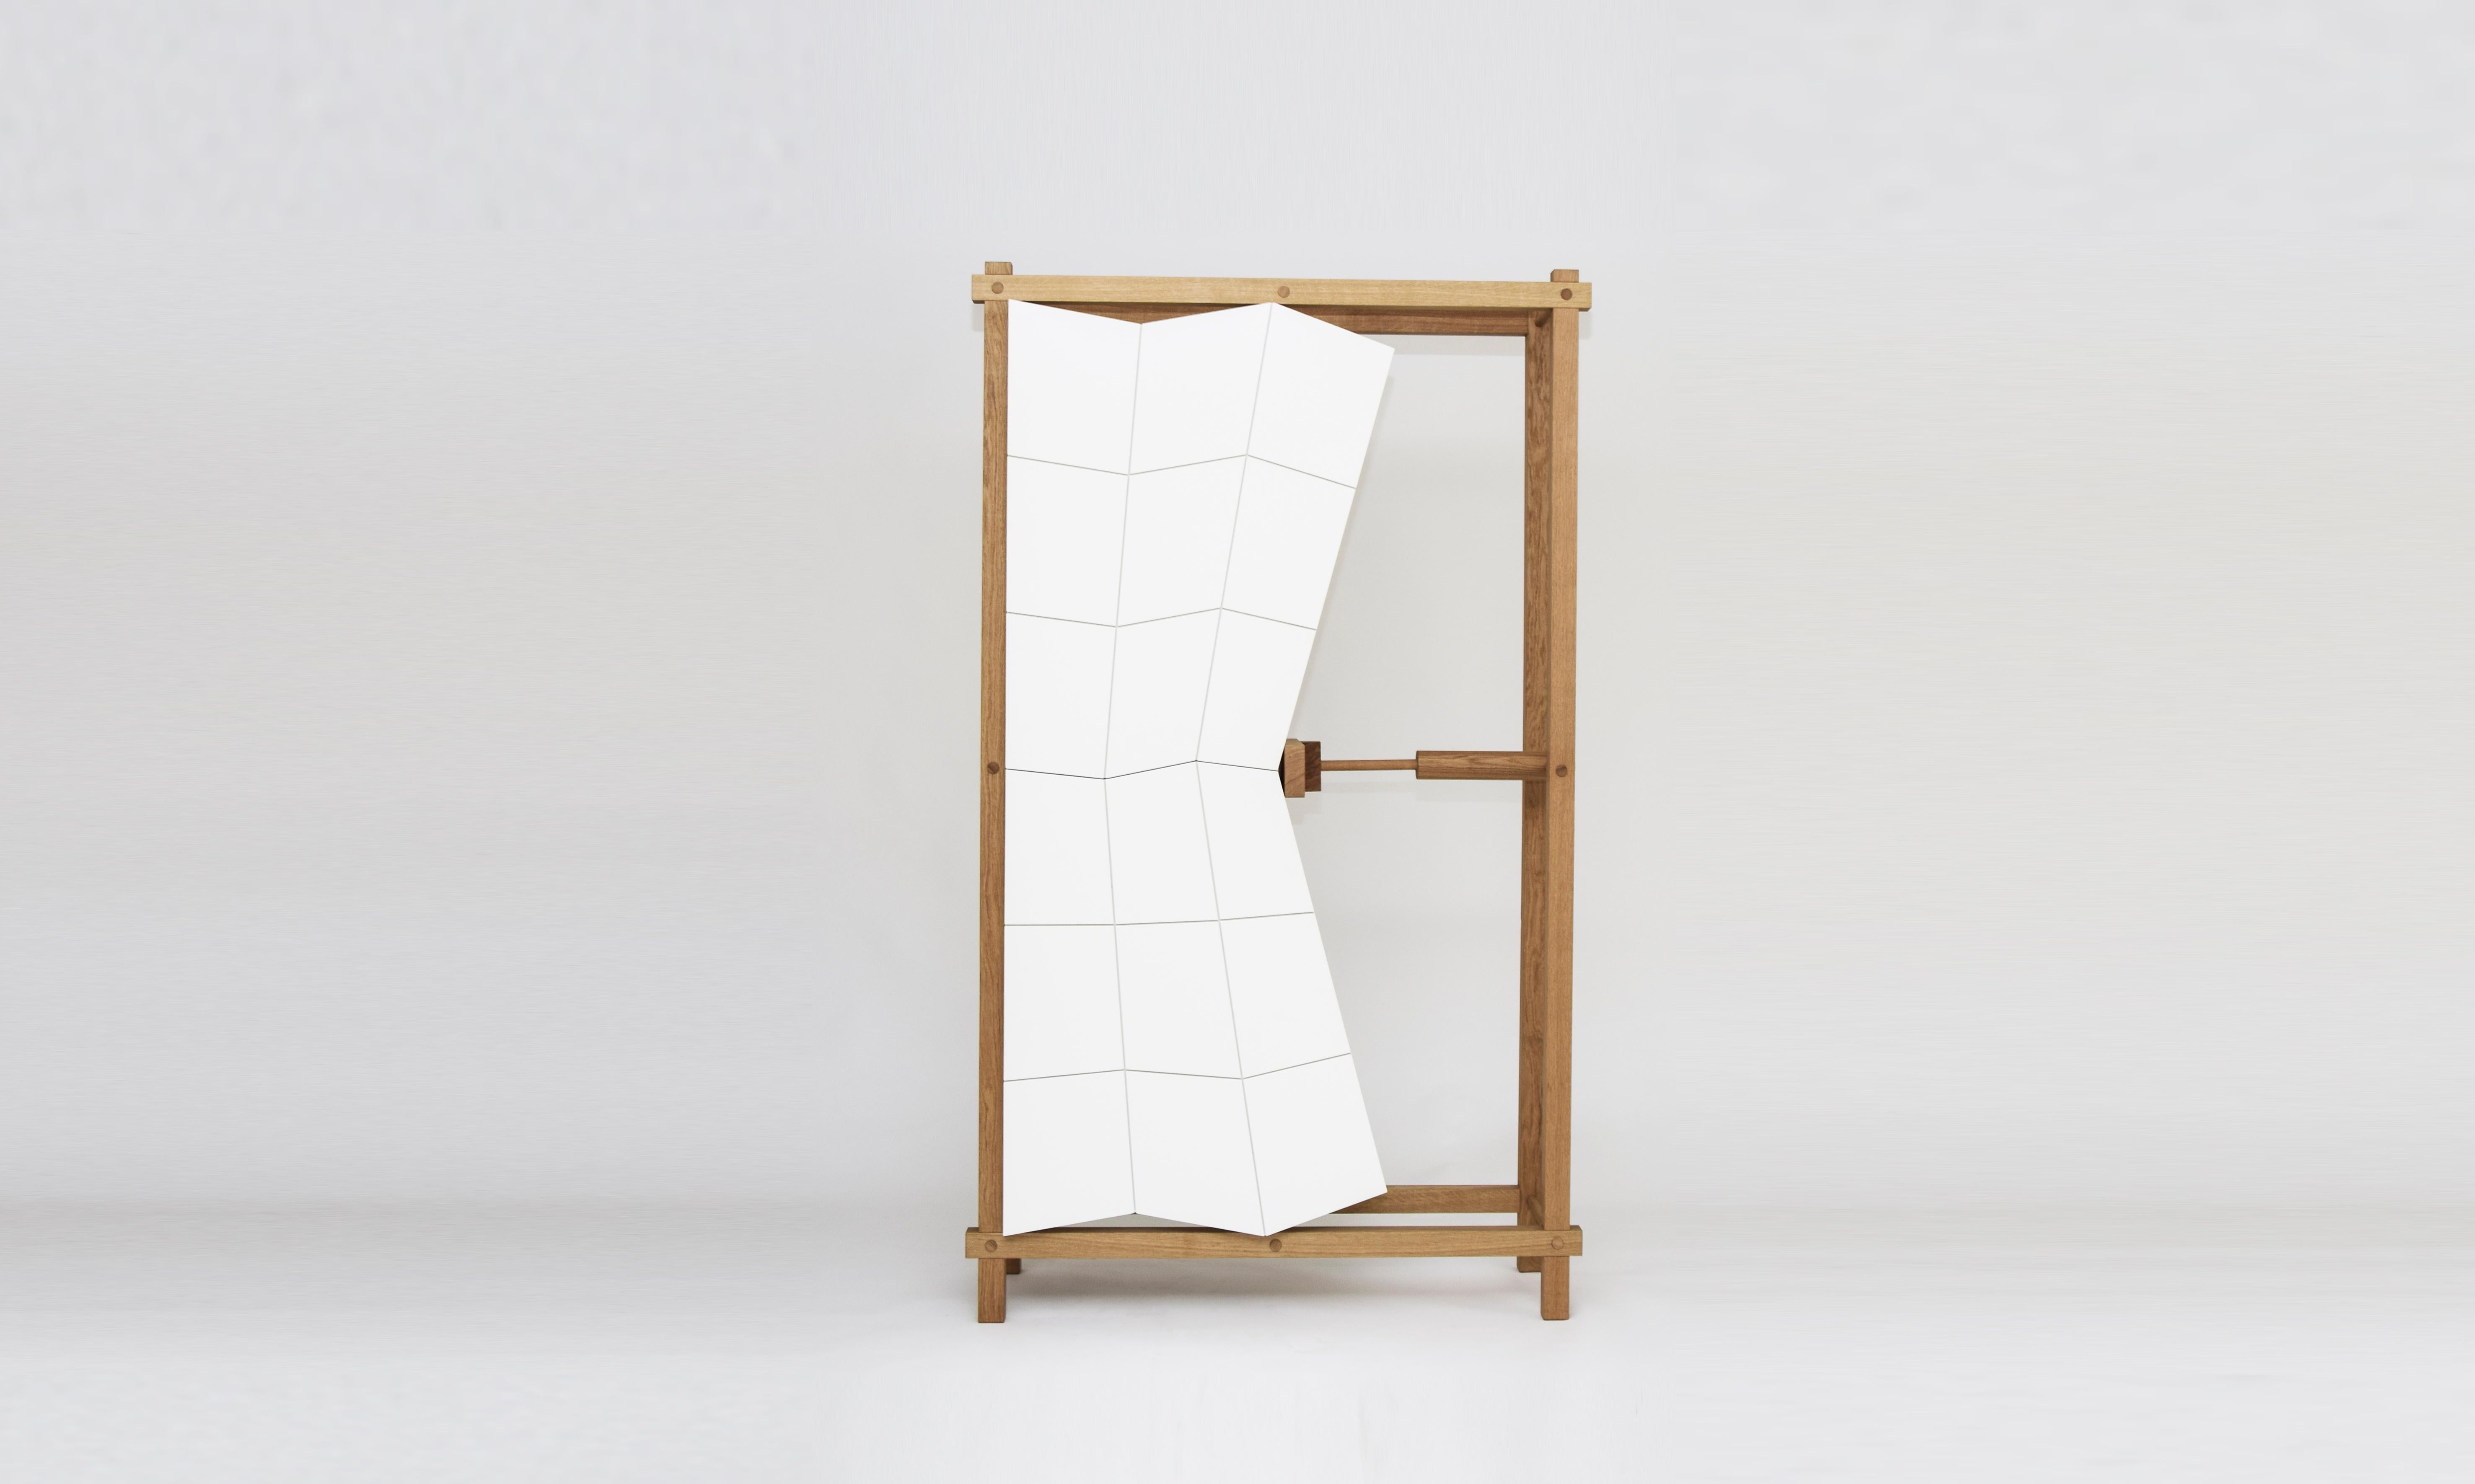 Stuck cabinet C1 by Studio Pin
Dimensions: W 120 x D 44 x H 205 cm
Materials: solid oak / MDF matt white finish.
Weight: 60 kg

“Stuck” by Studio Pin is a collection that goes against the grain in which form follows function. A stereotypical